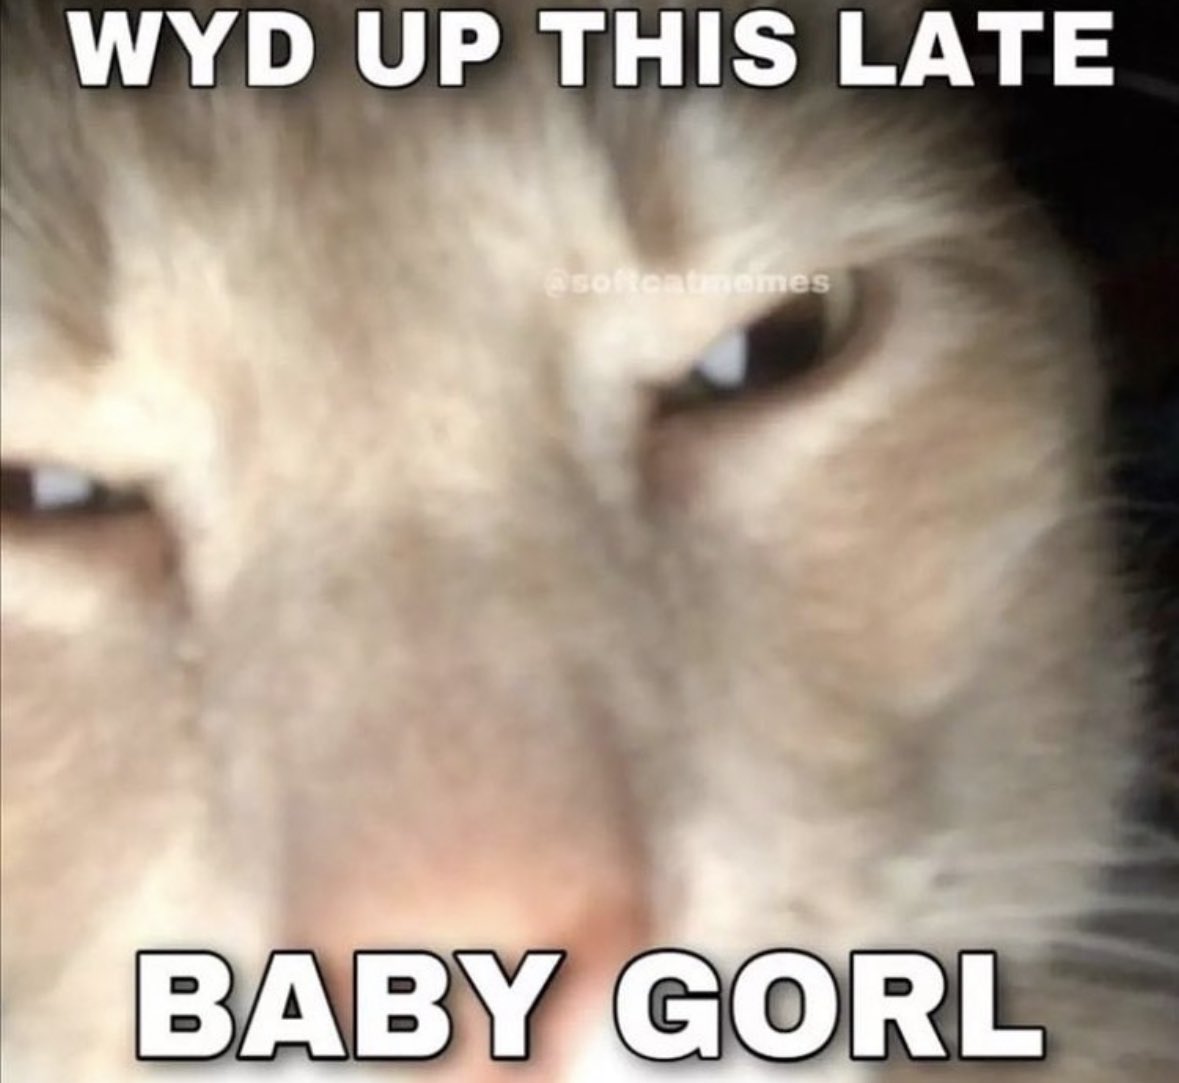 cat says "wyd this late babygirl."